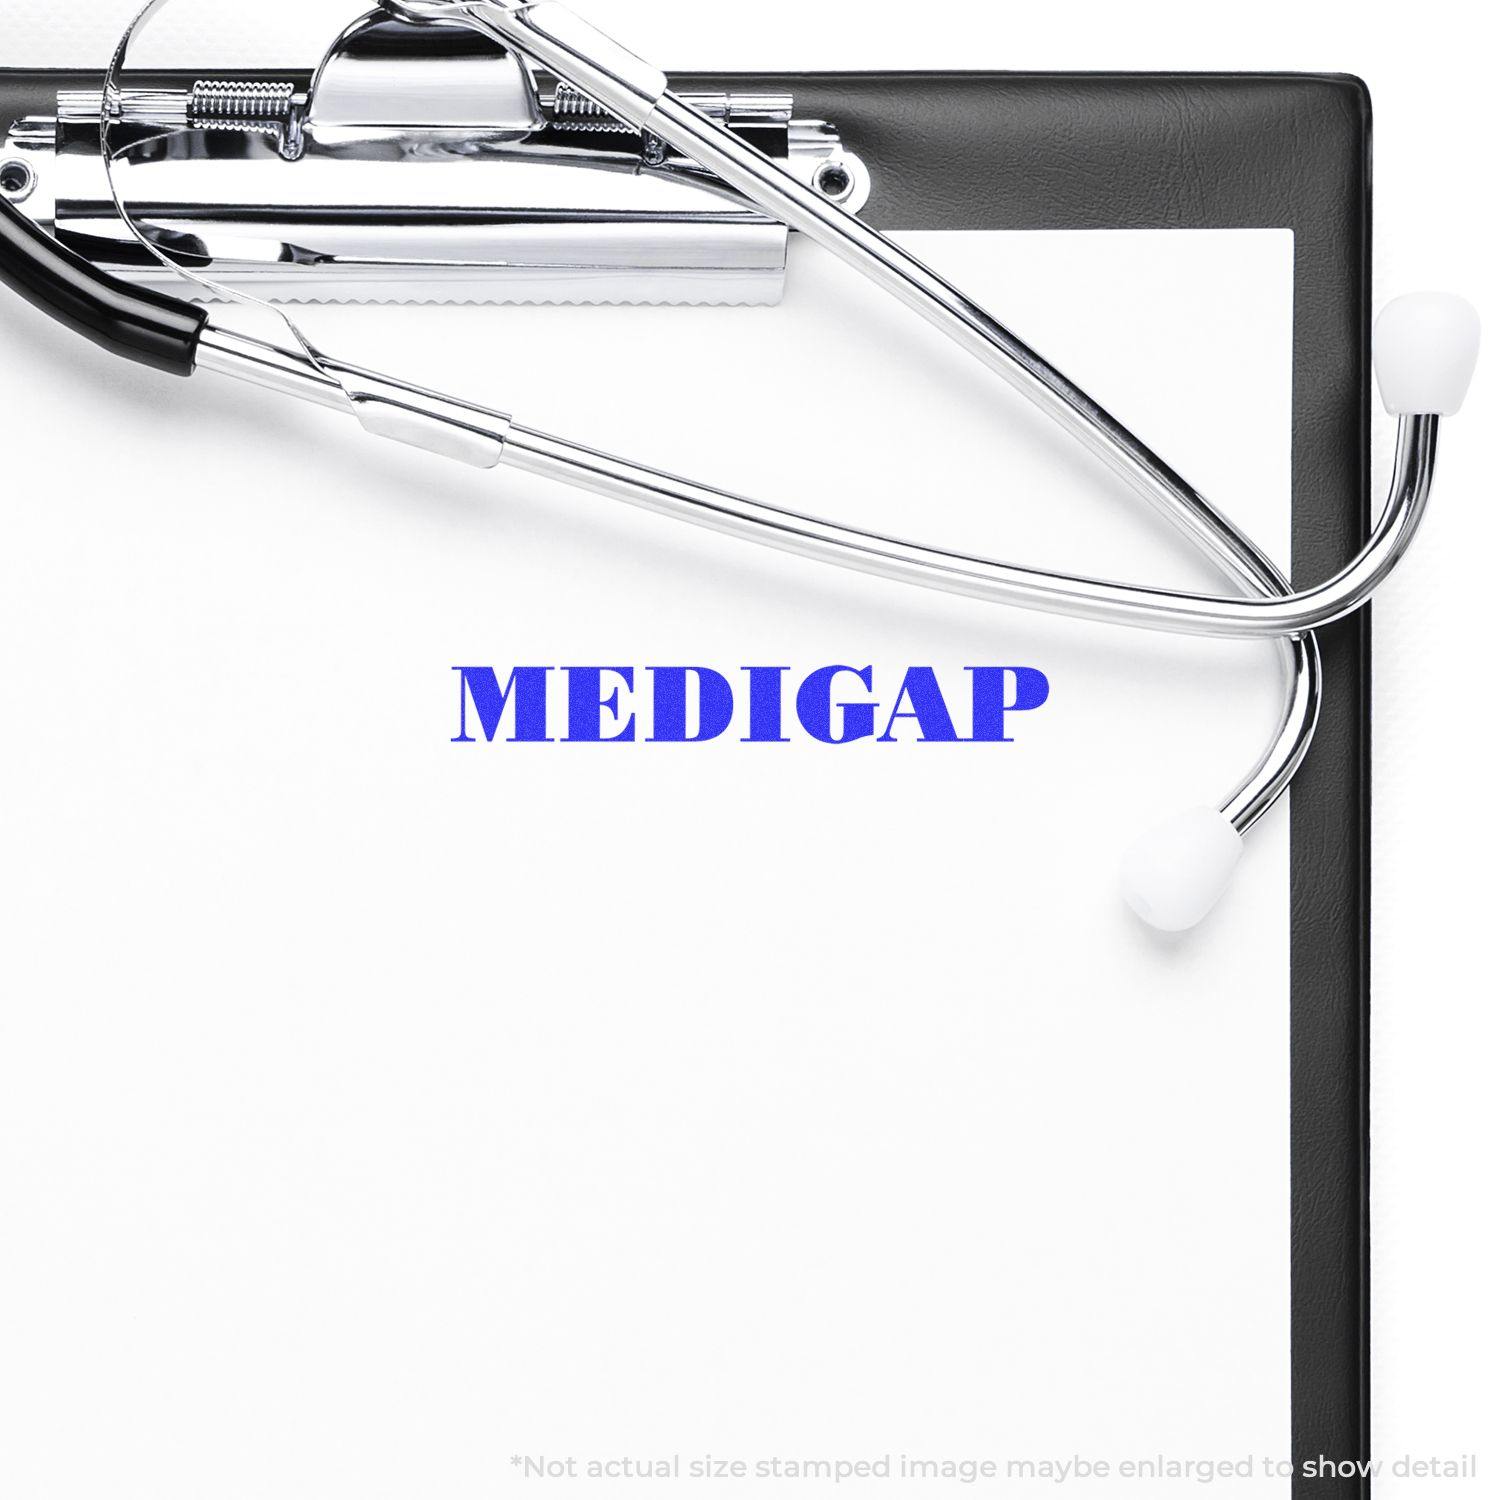 A stock office medical rubber stamp with a stamped image showing how the text "MEDIGAP" is displayed after stamping.